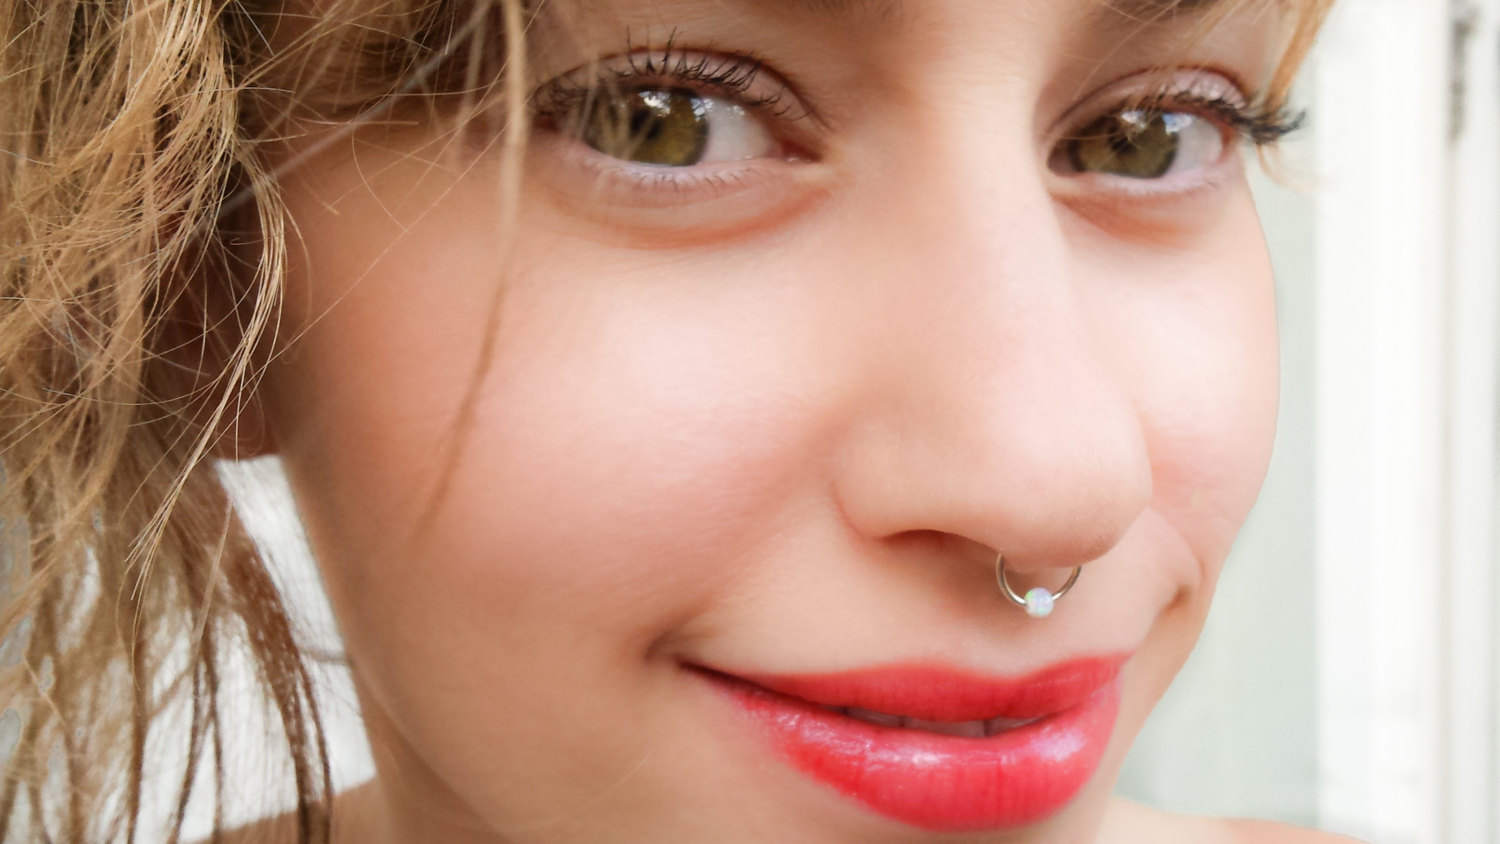 Best fake nose and septum rings - Galaxy Piercing